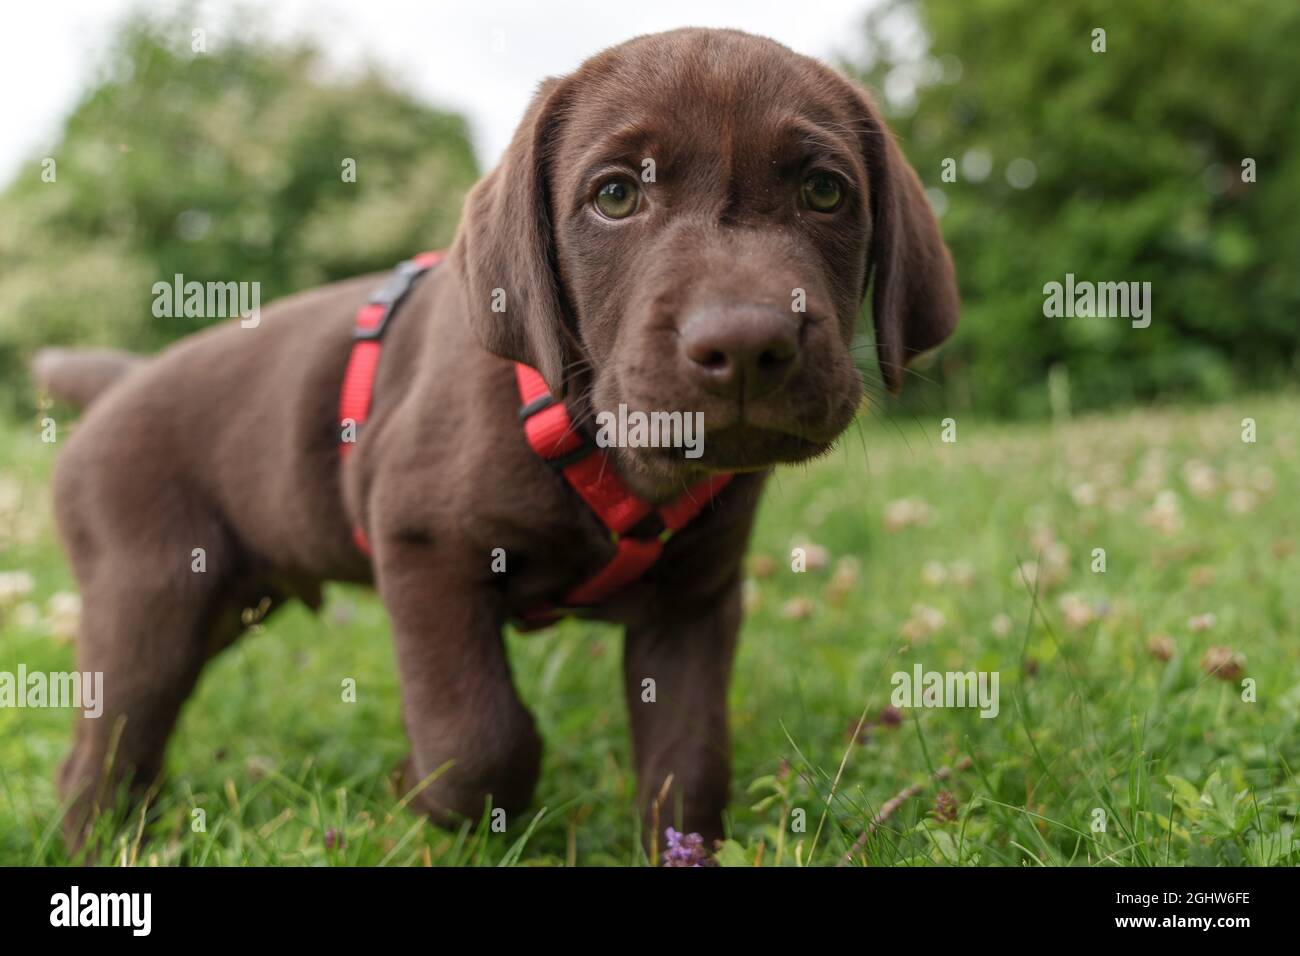 Portrait of a Chocolate Labrador Puppy standing in the grass, Austria Stock Photo